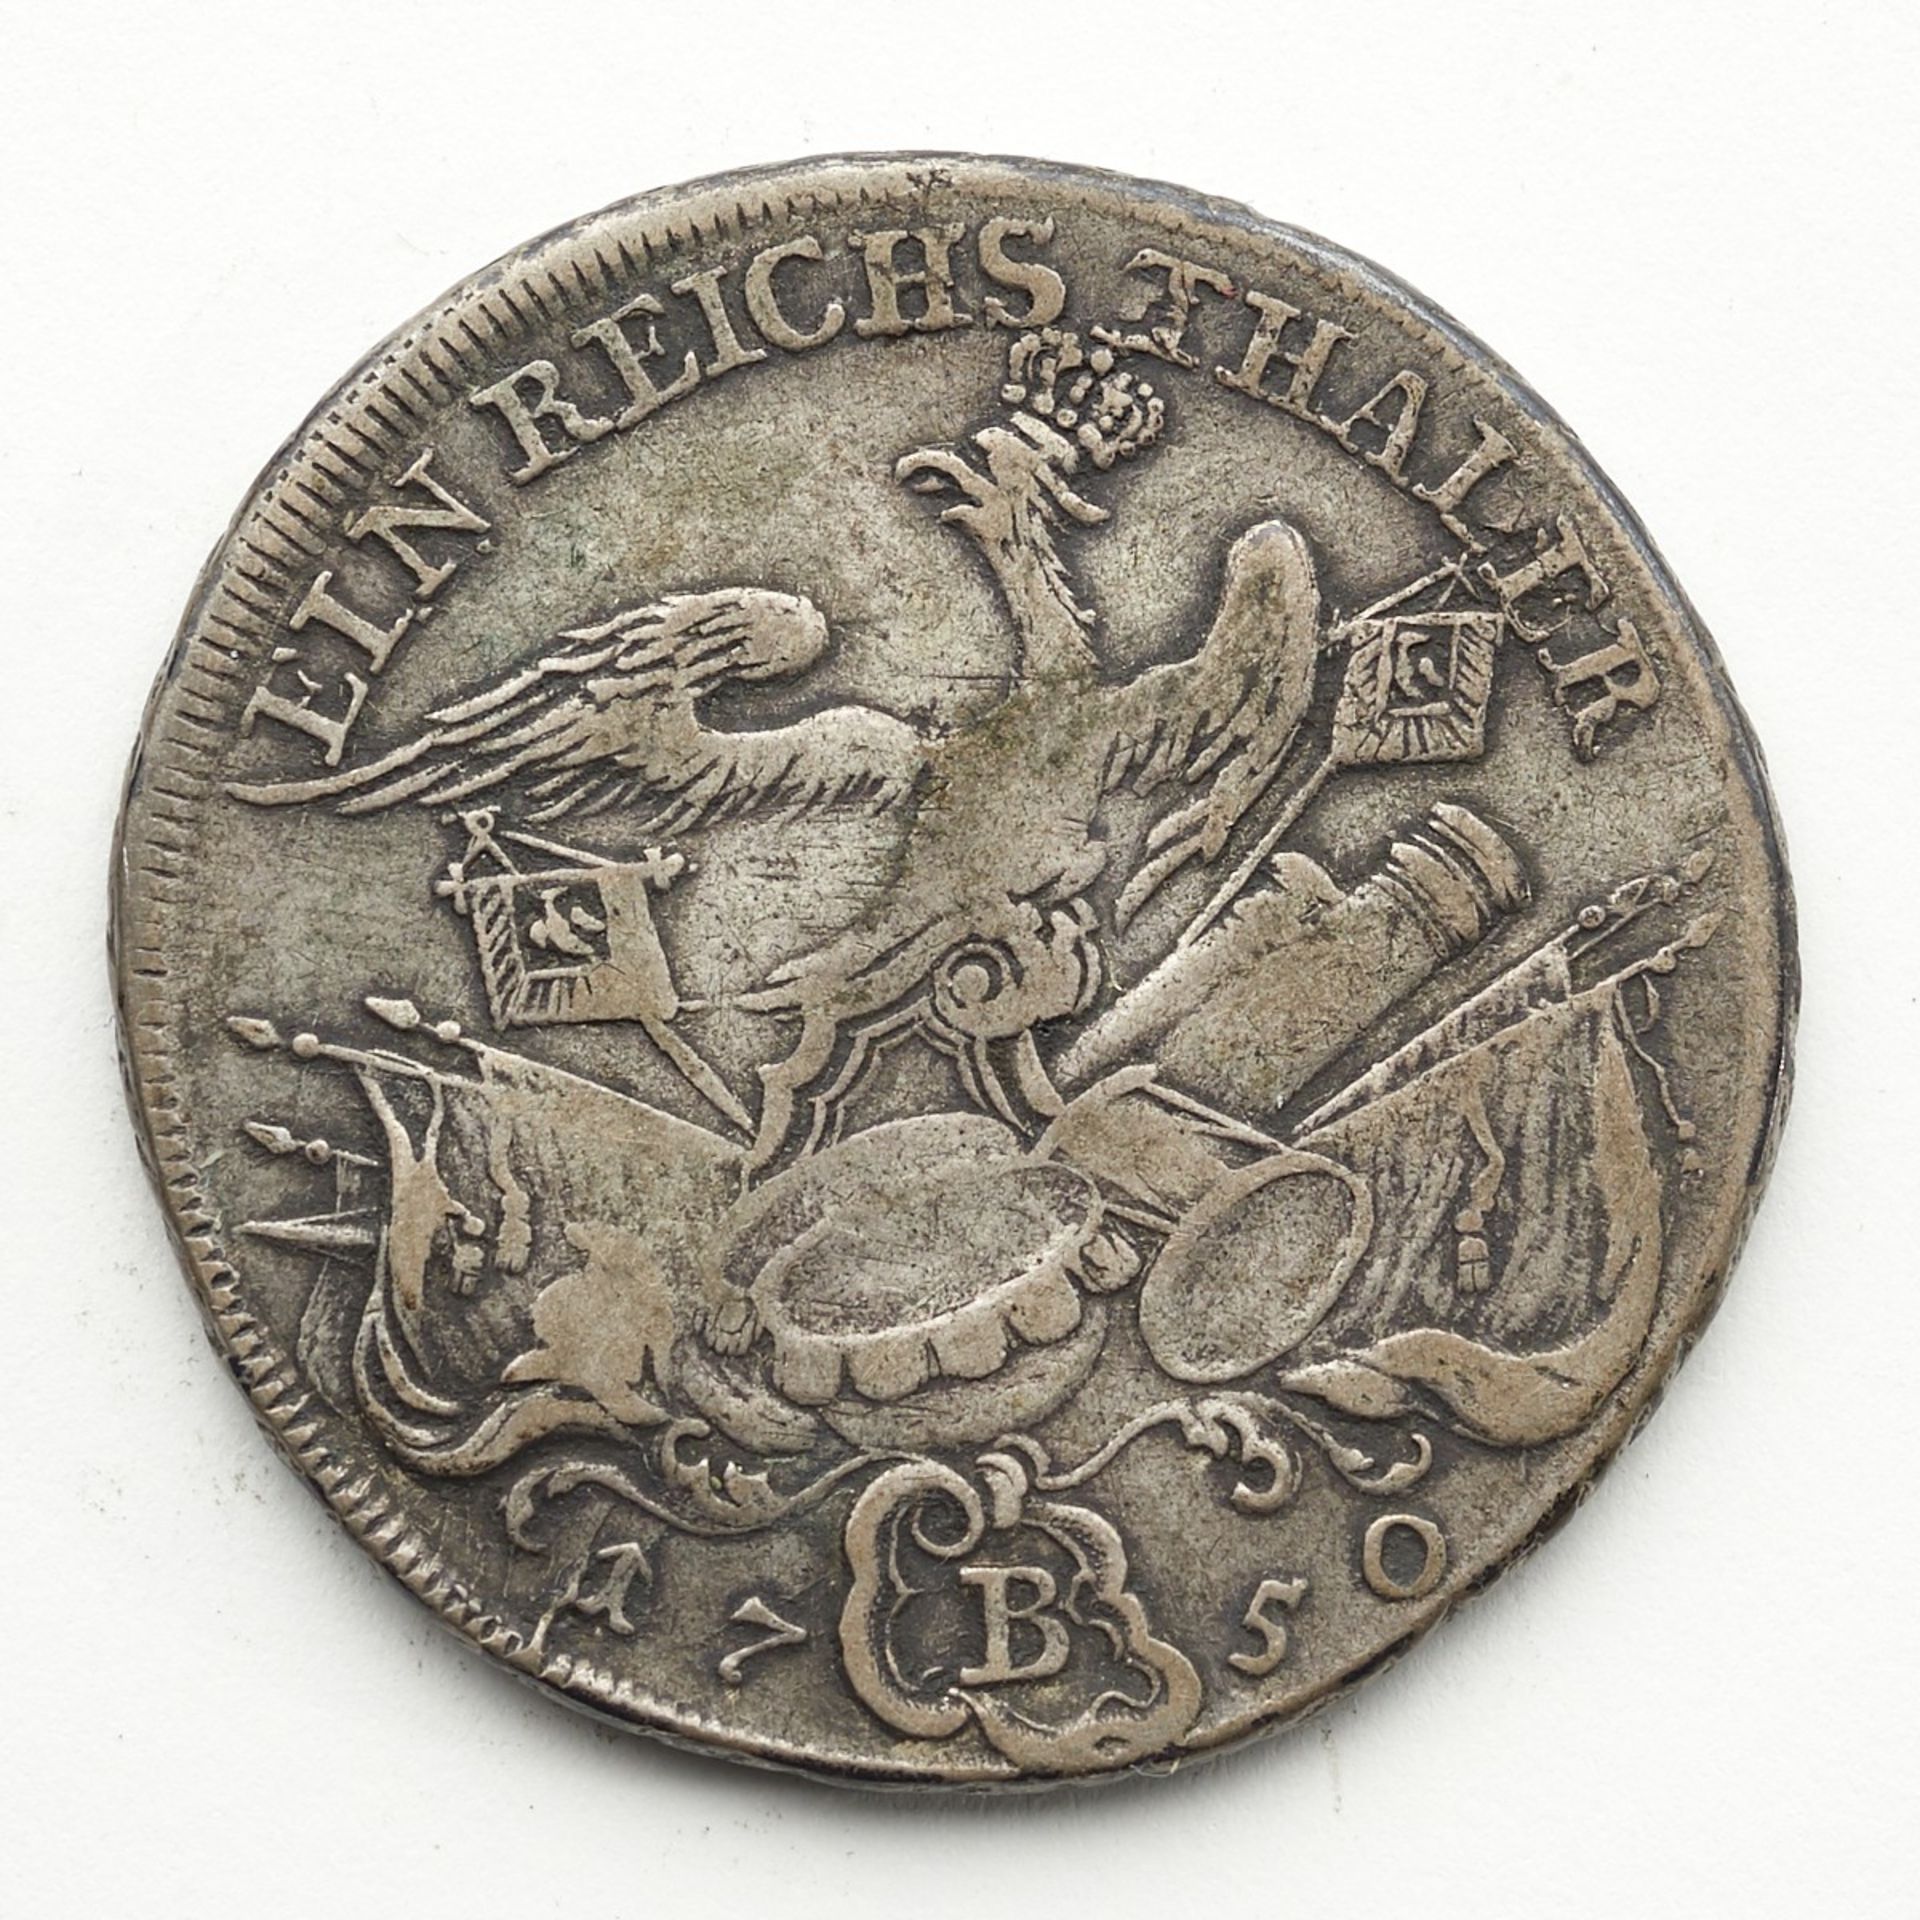 Prussian 1750-B Thaler Coin - Image 2 of 2